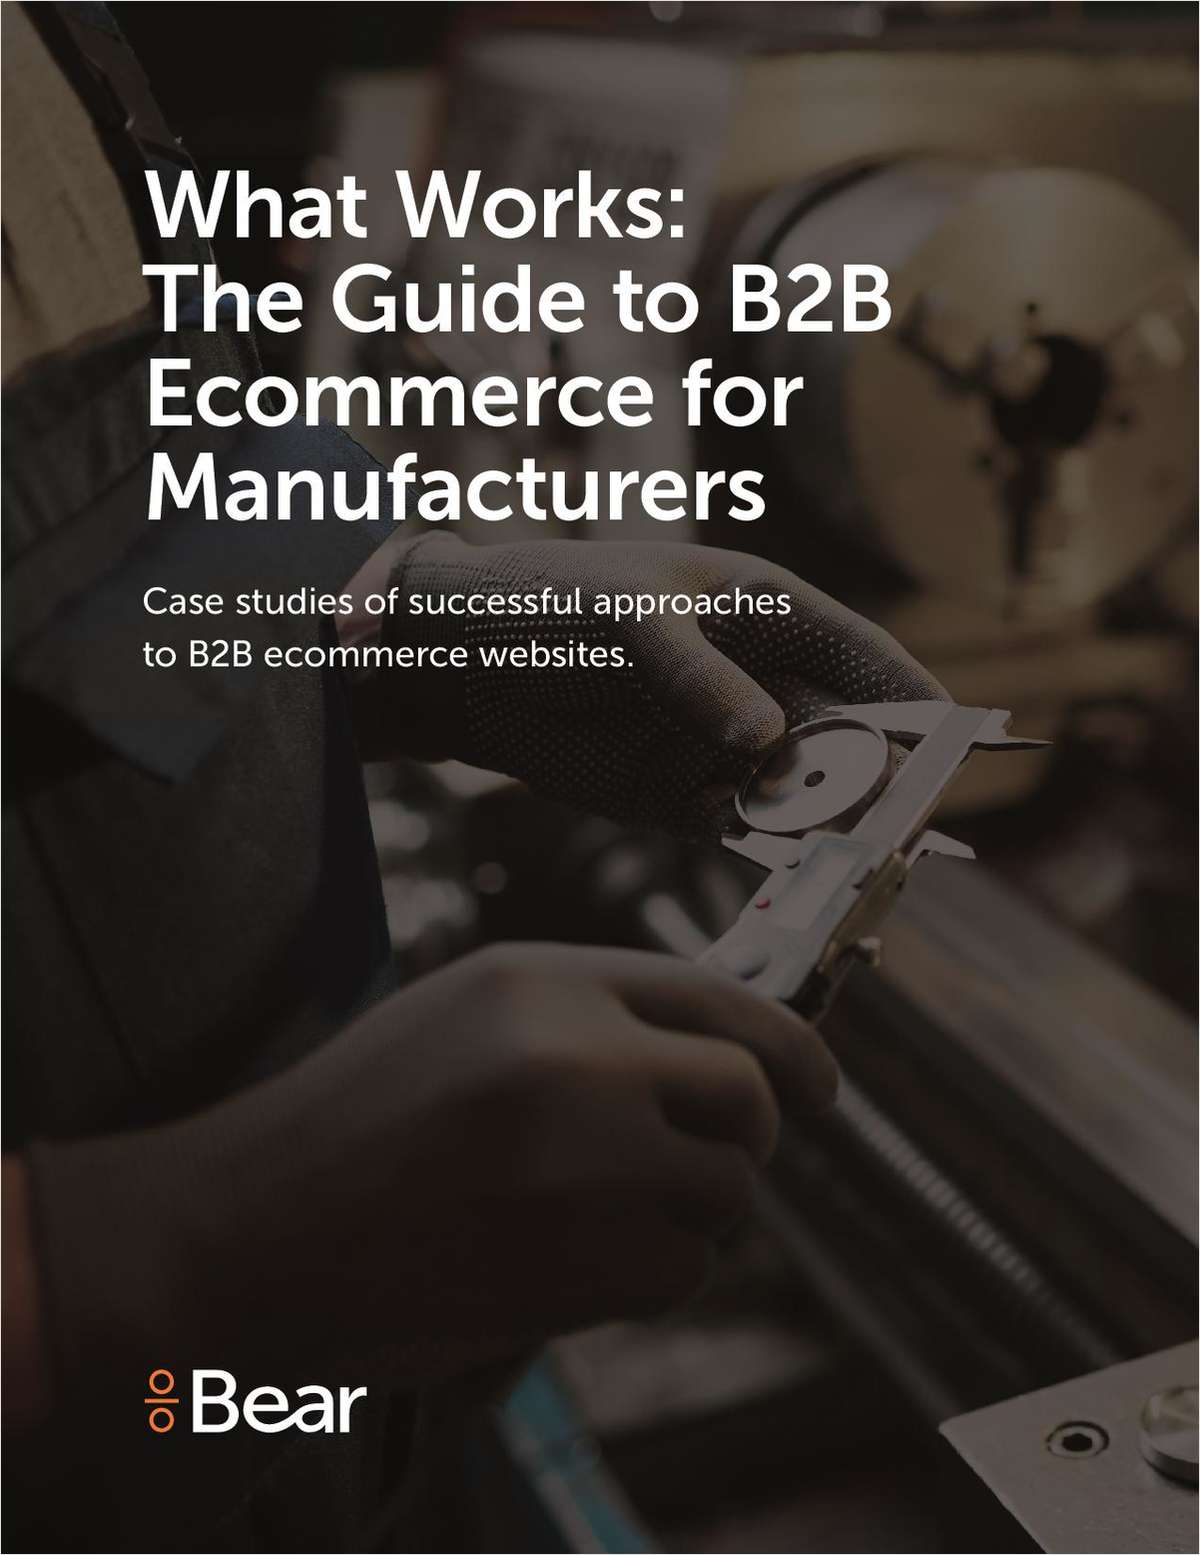 What Works: The Guide to B2B Ecommerce for Manufacturers